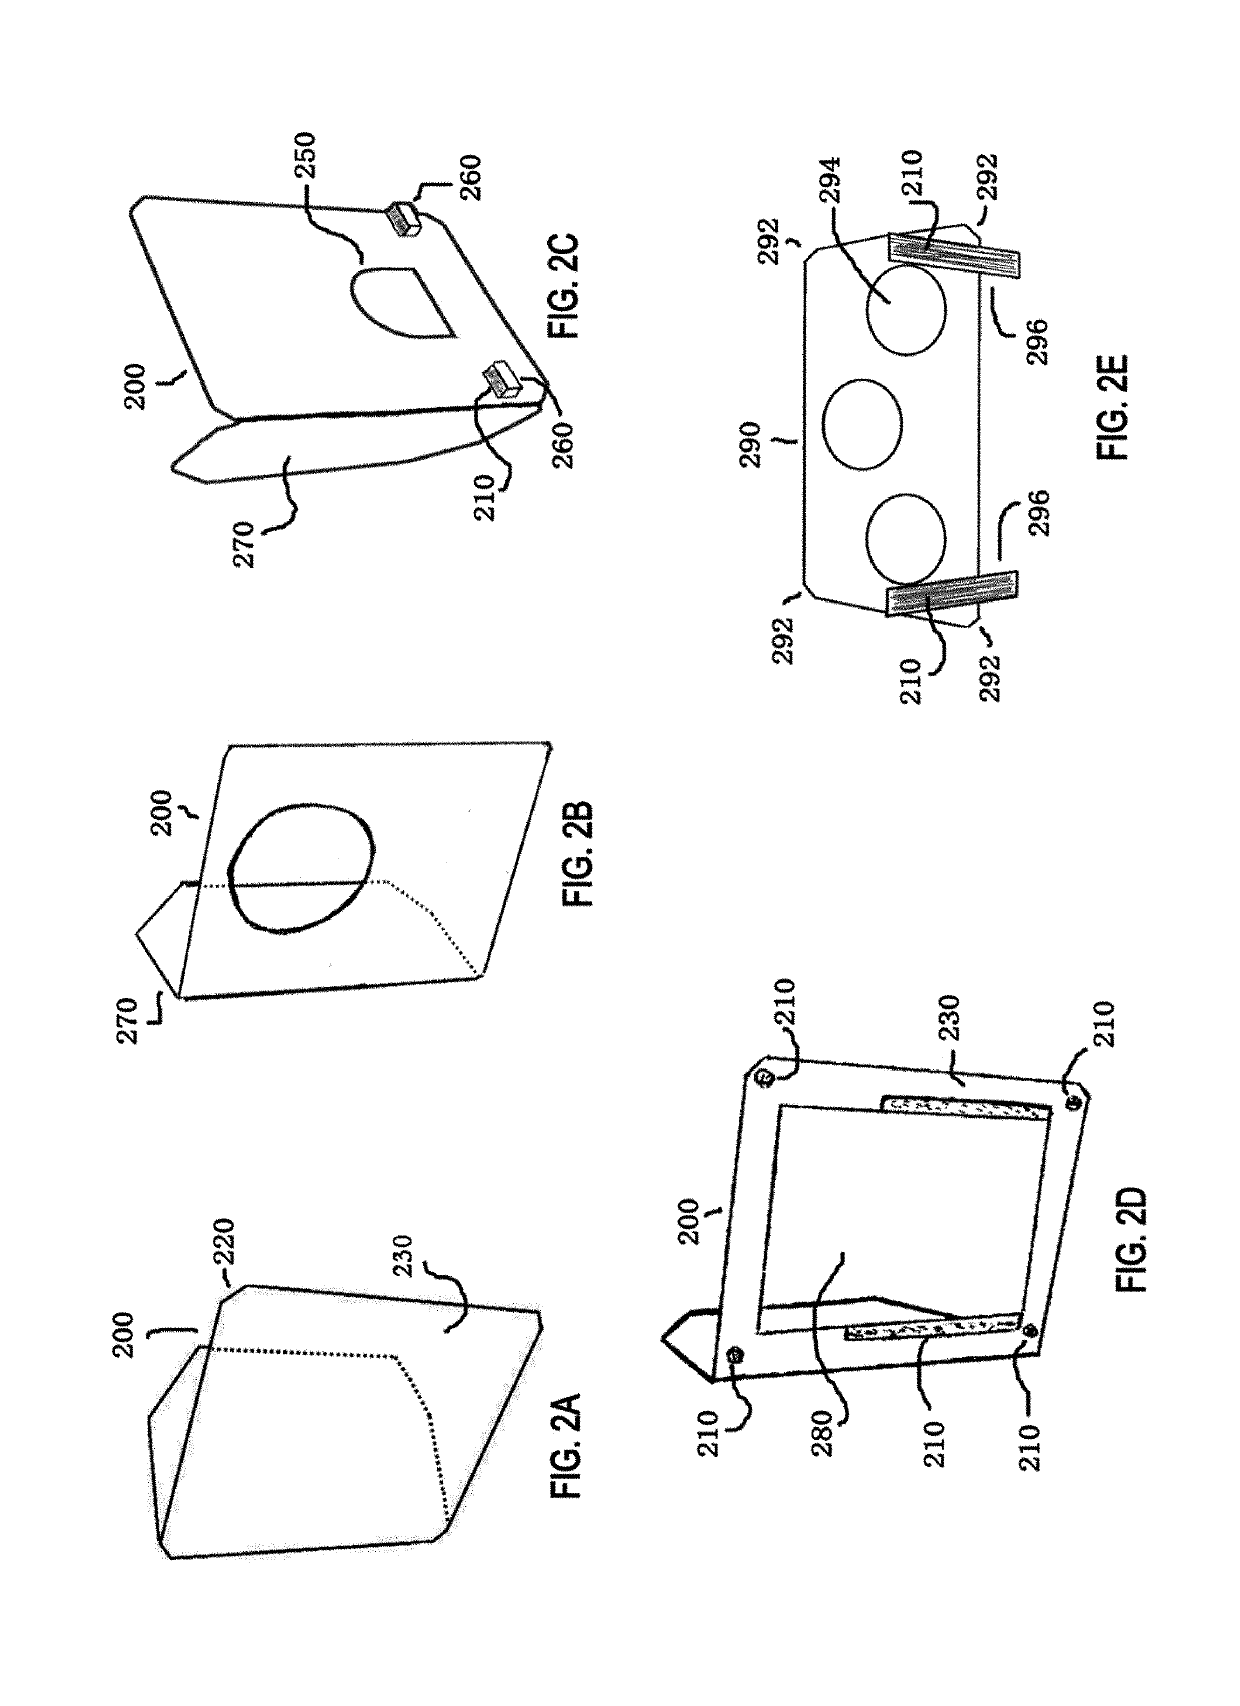 DETACHABLE MULTI-FUNCTIONAL HOUSING COMPARTMENT INSERT WITH Attachable ACCESSORY Templates